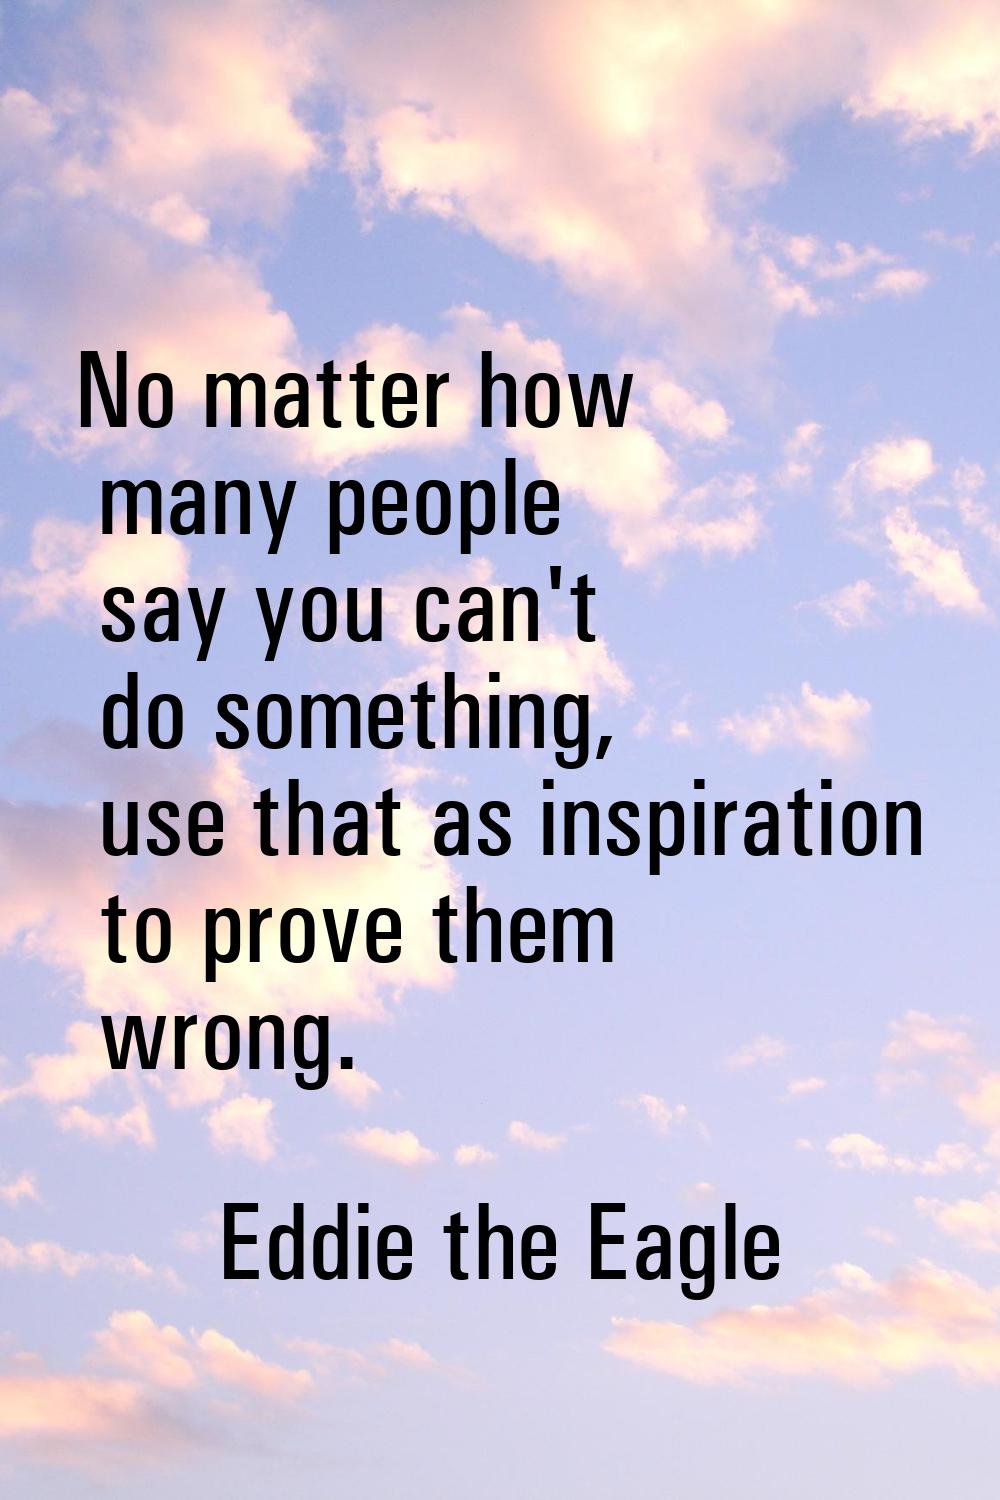 No matter how many people say you can't do something, use that as inspiration to prove them wrong.